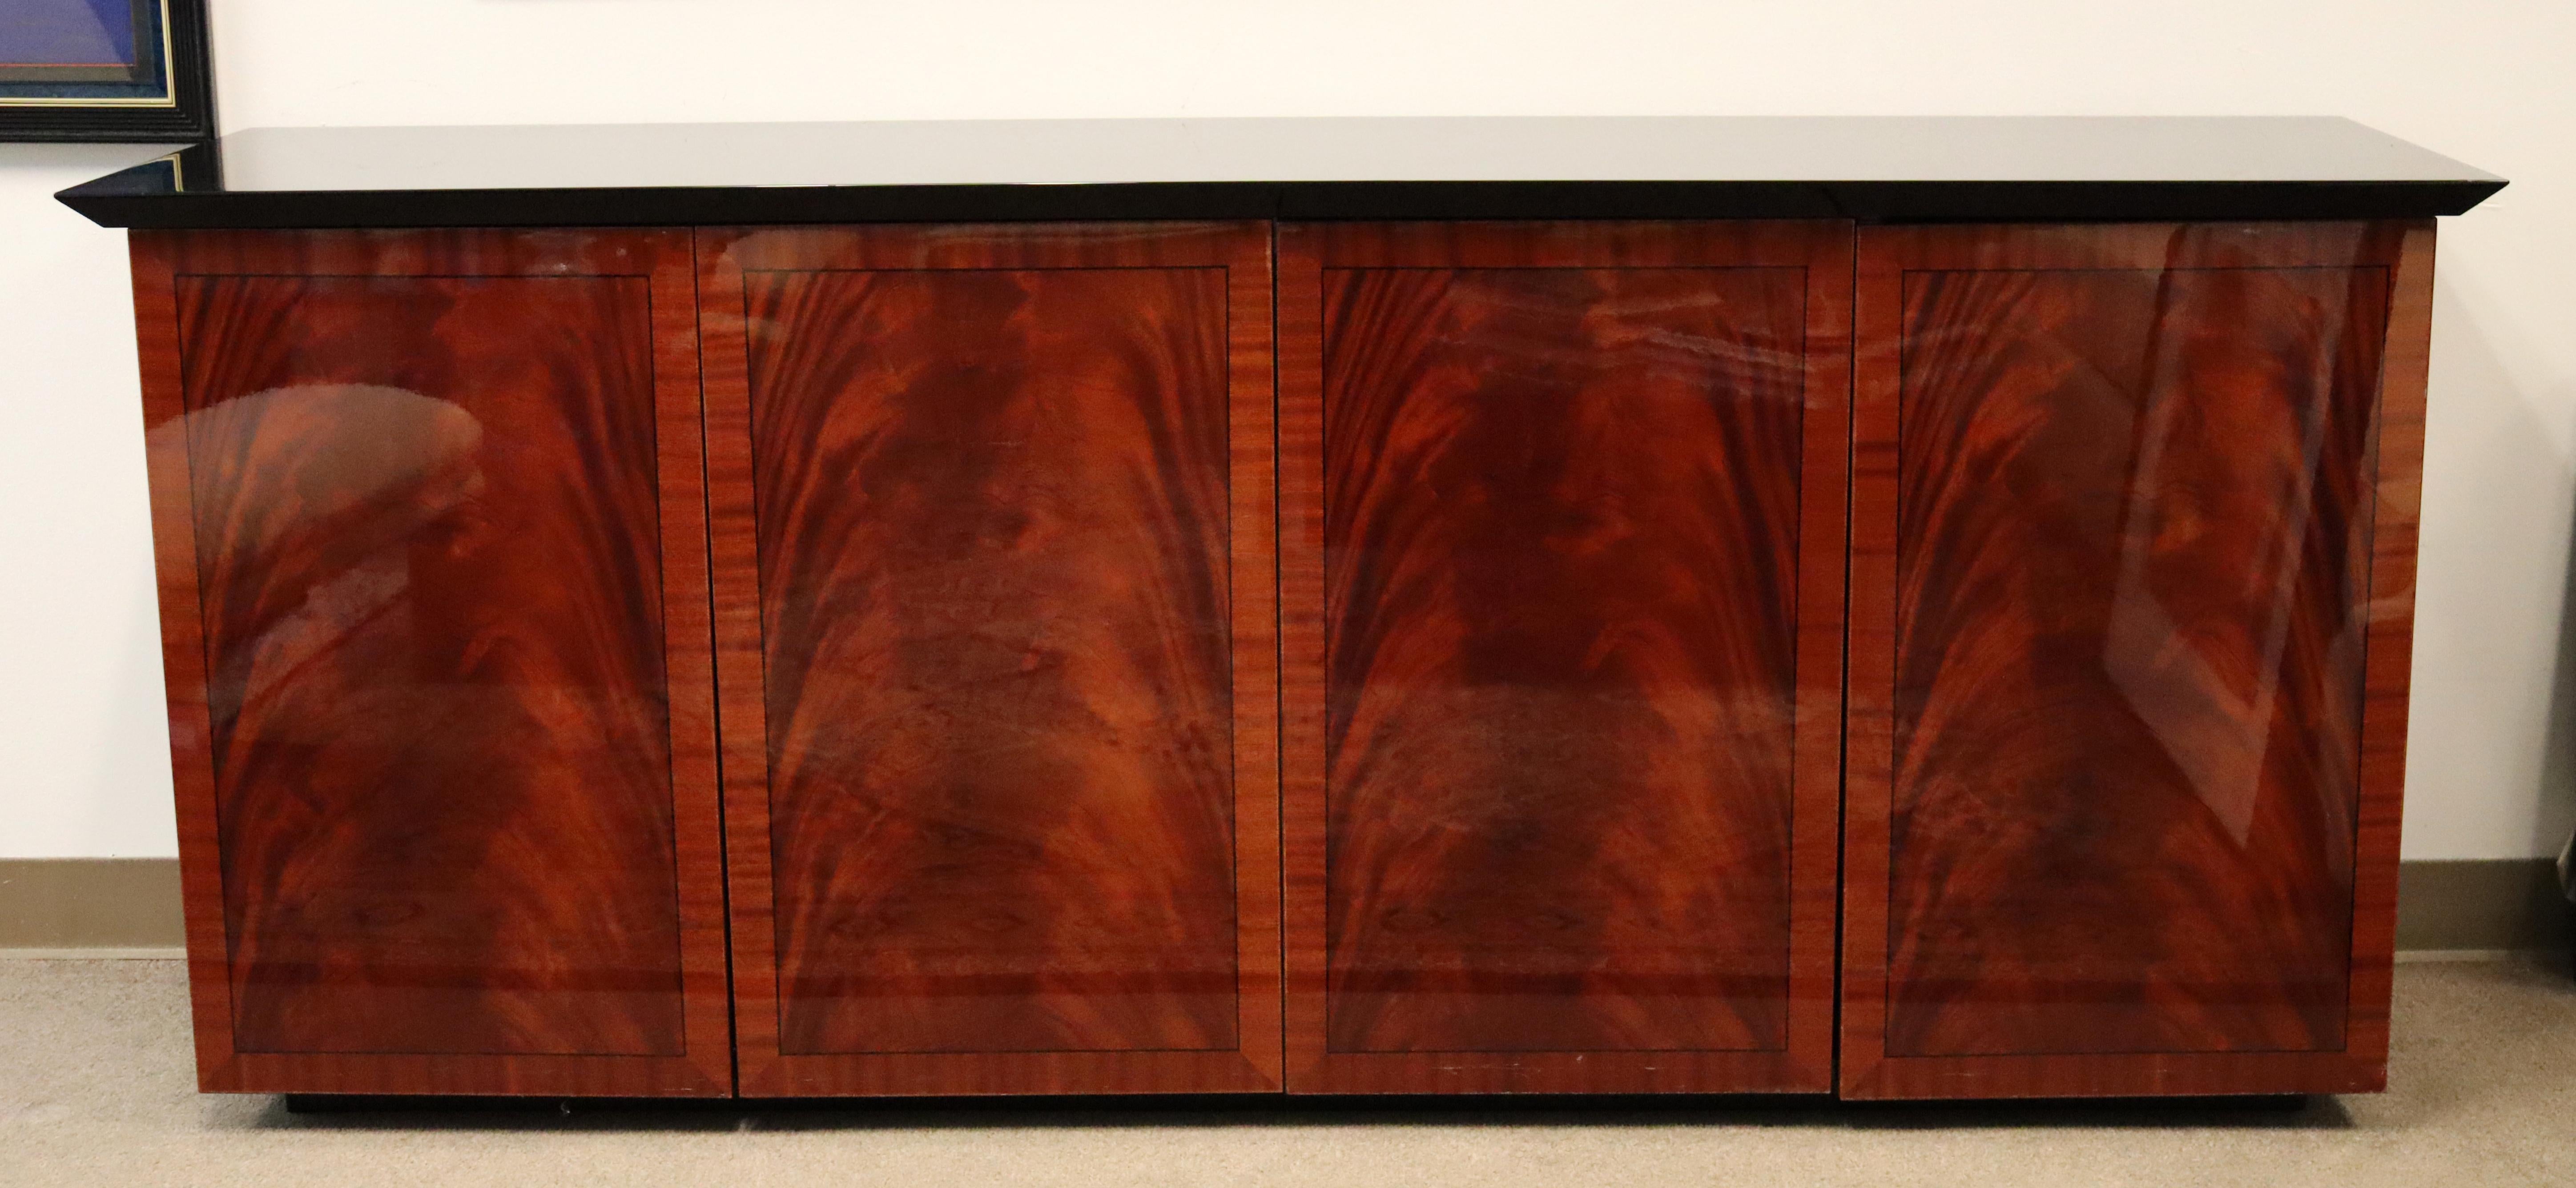 For your consideration is a lovely, brown and black lacquer credenza, with two drawers, by Ello, made in Italy, circa the 1980s. In excellent vintage condition. The dimensions are 75